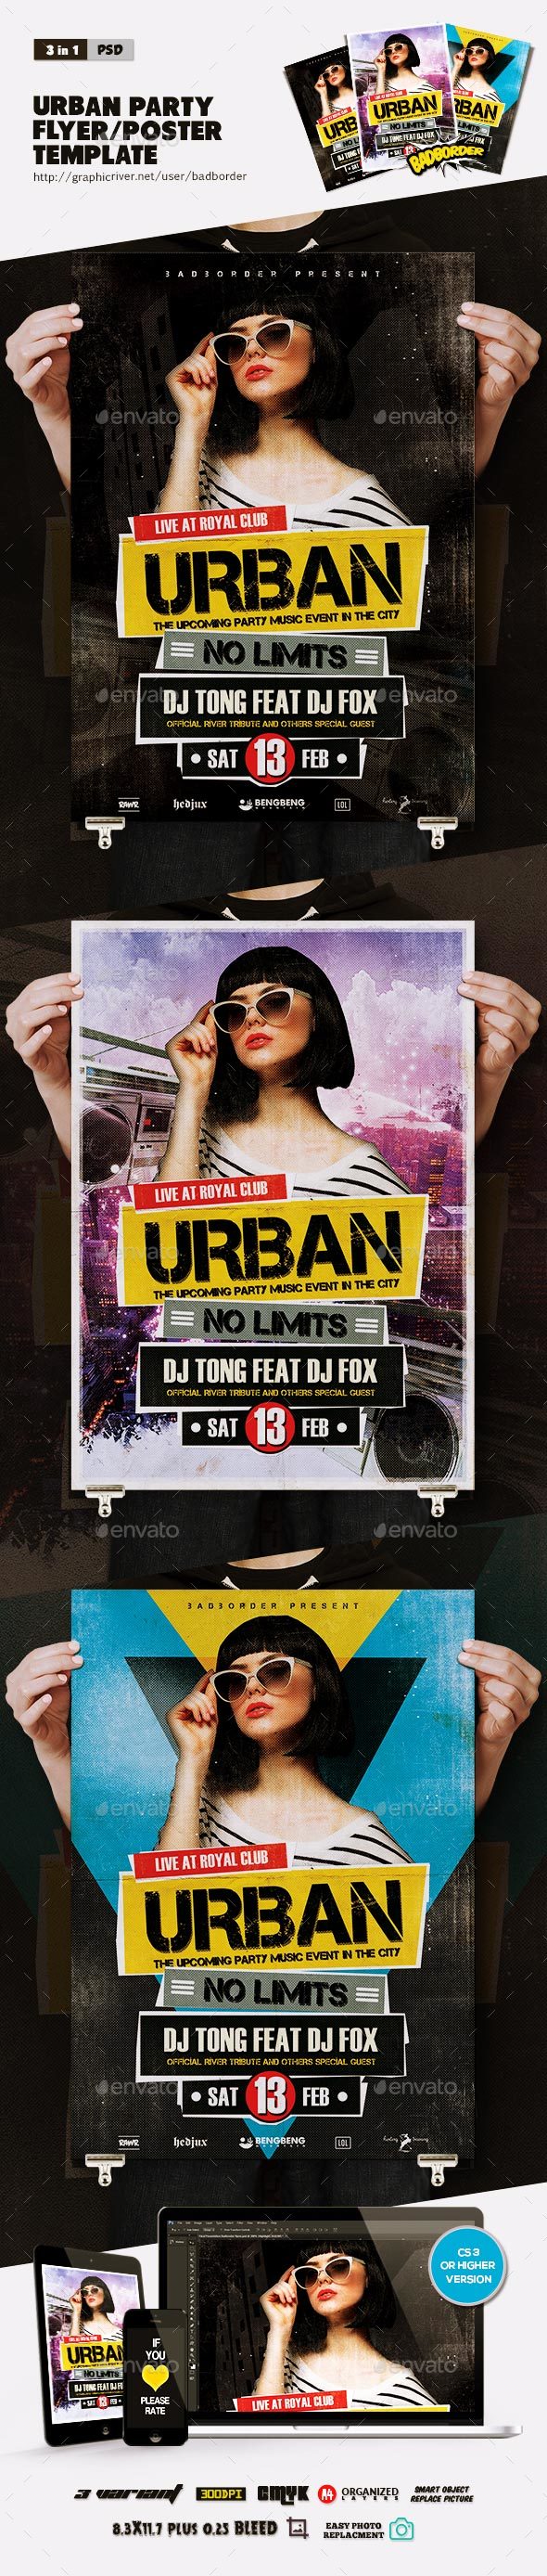 Urban Party Flyer/Poster